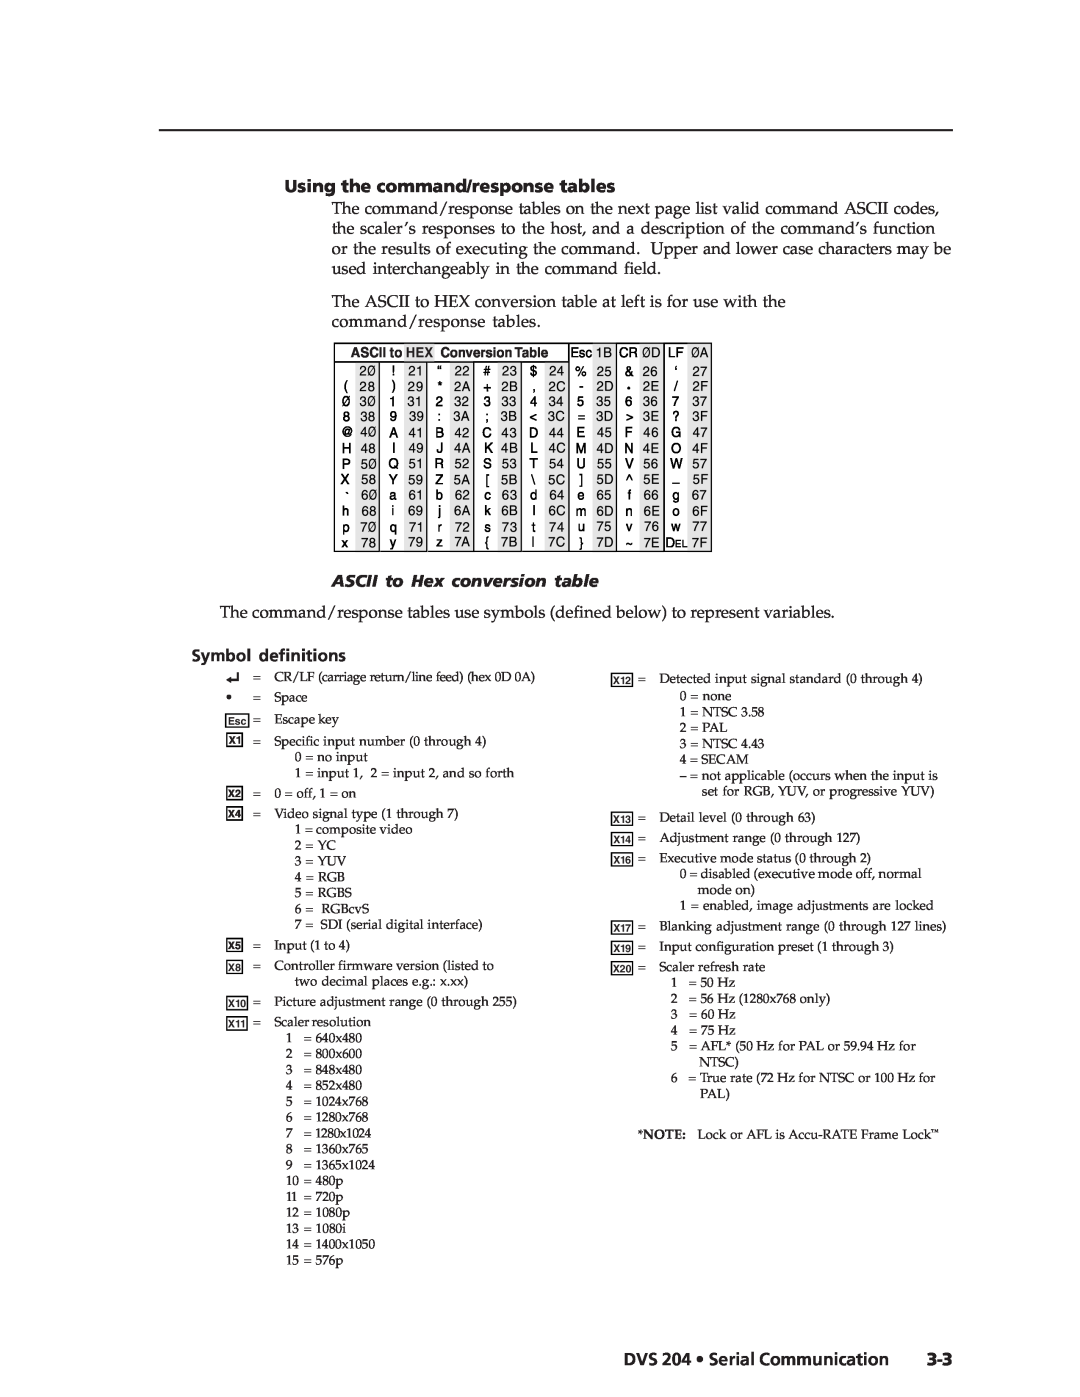 Extron electronic DVS 204 D manual Using the command/response tables, ASCII to Hex conversion table, Symbol definitions 